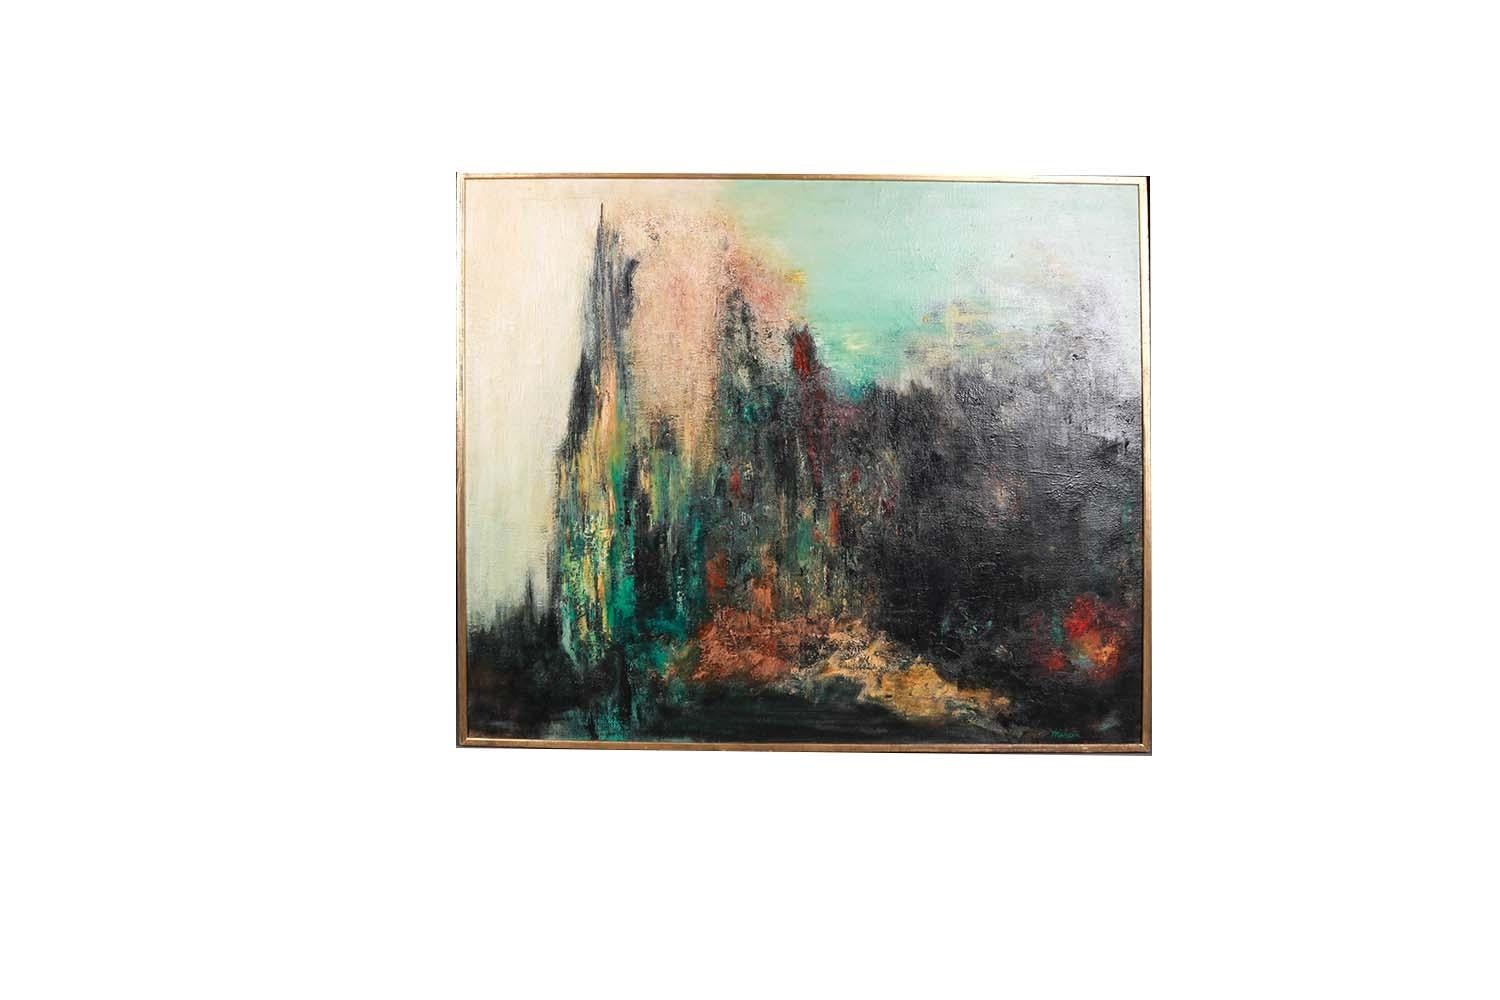 A large, original, gorgeous, abstract on canvas, by artist Etta C. Mercur, signed lower right.  This original large work of art is an excellent example of abstract style from the 20th century. Impressive abstract painting that  is quite striking,